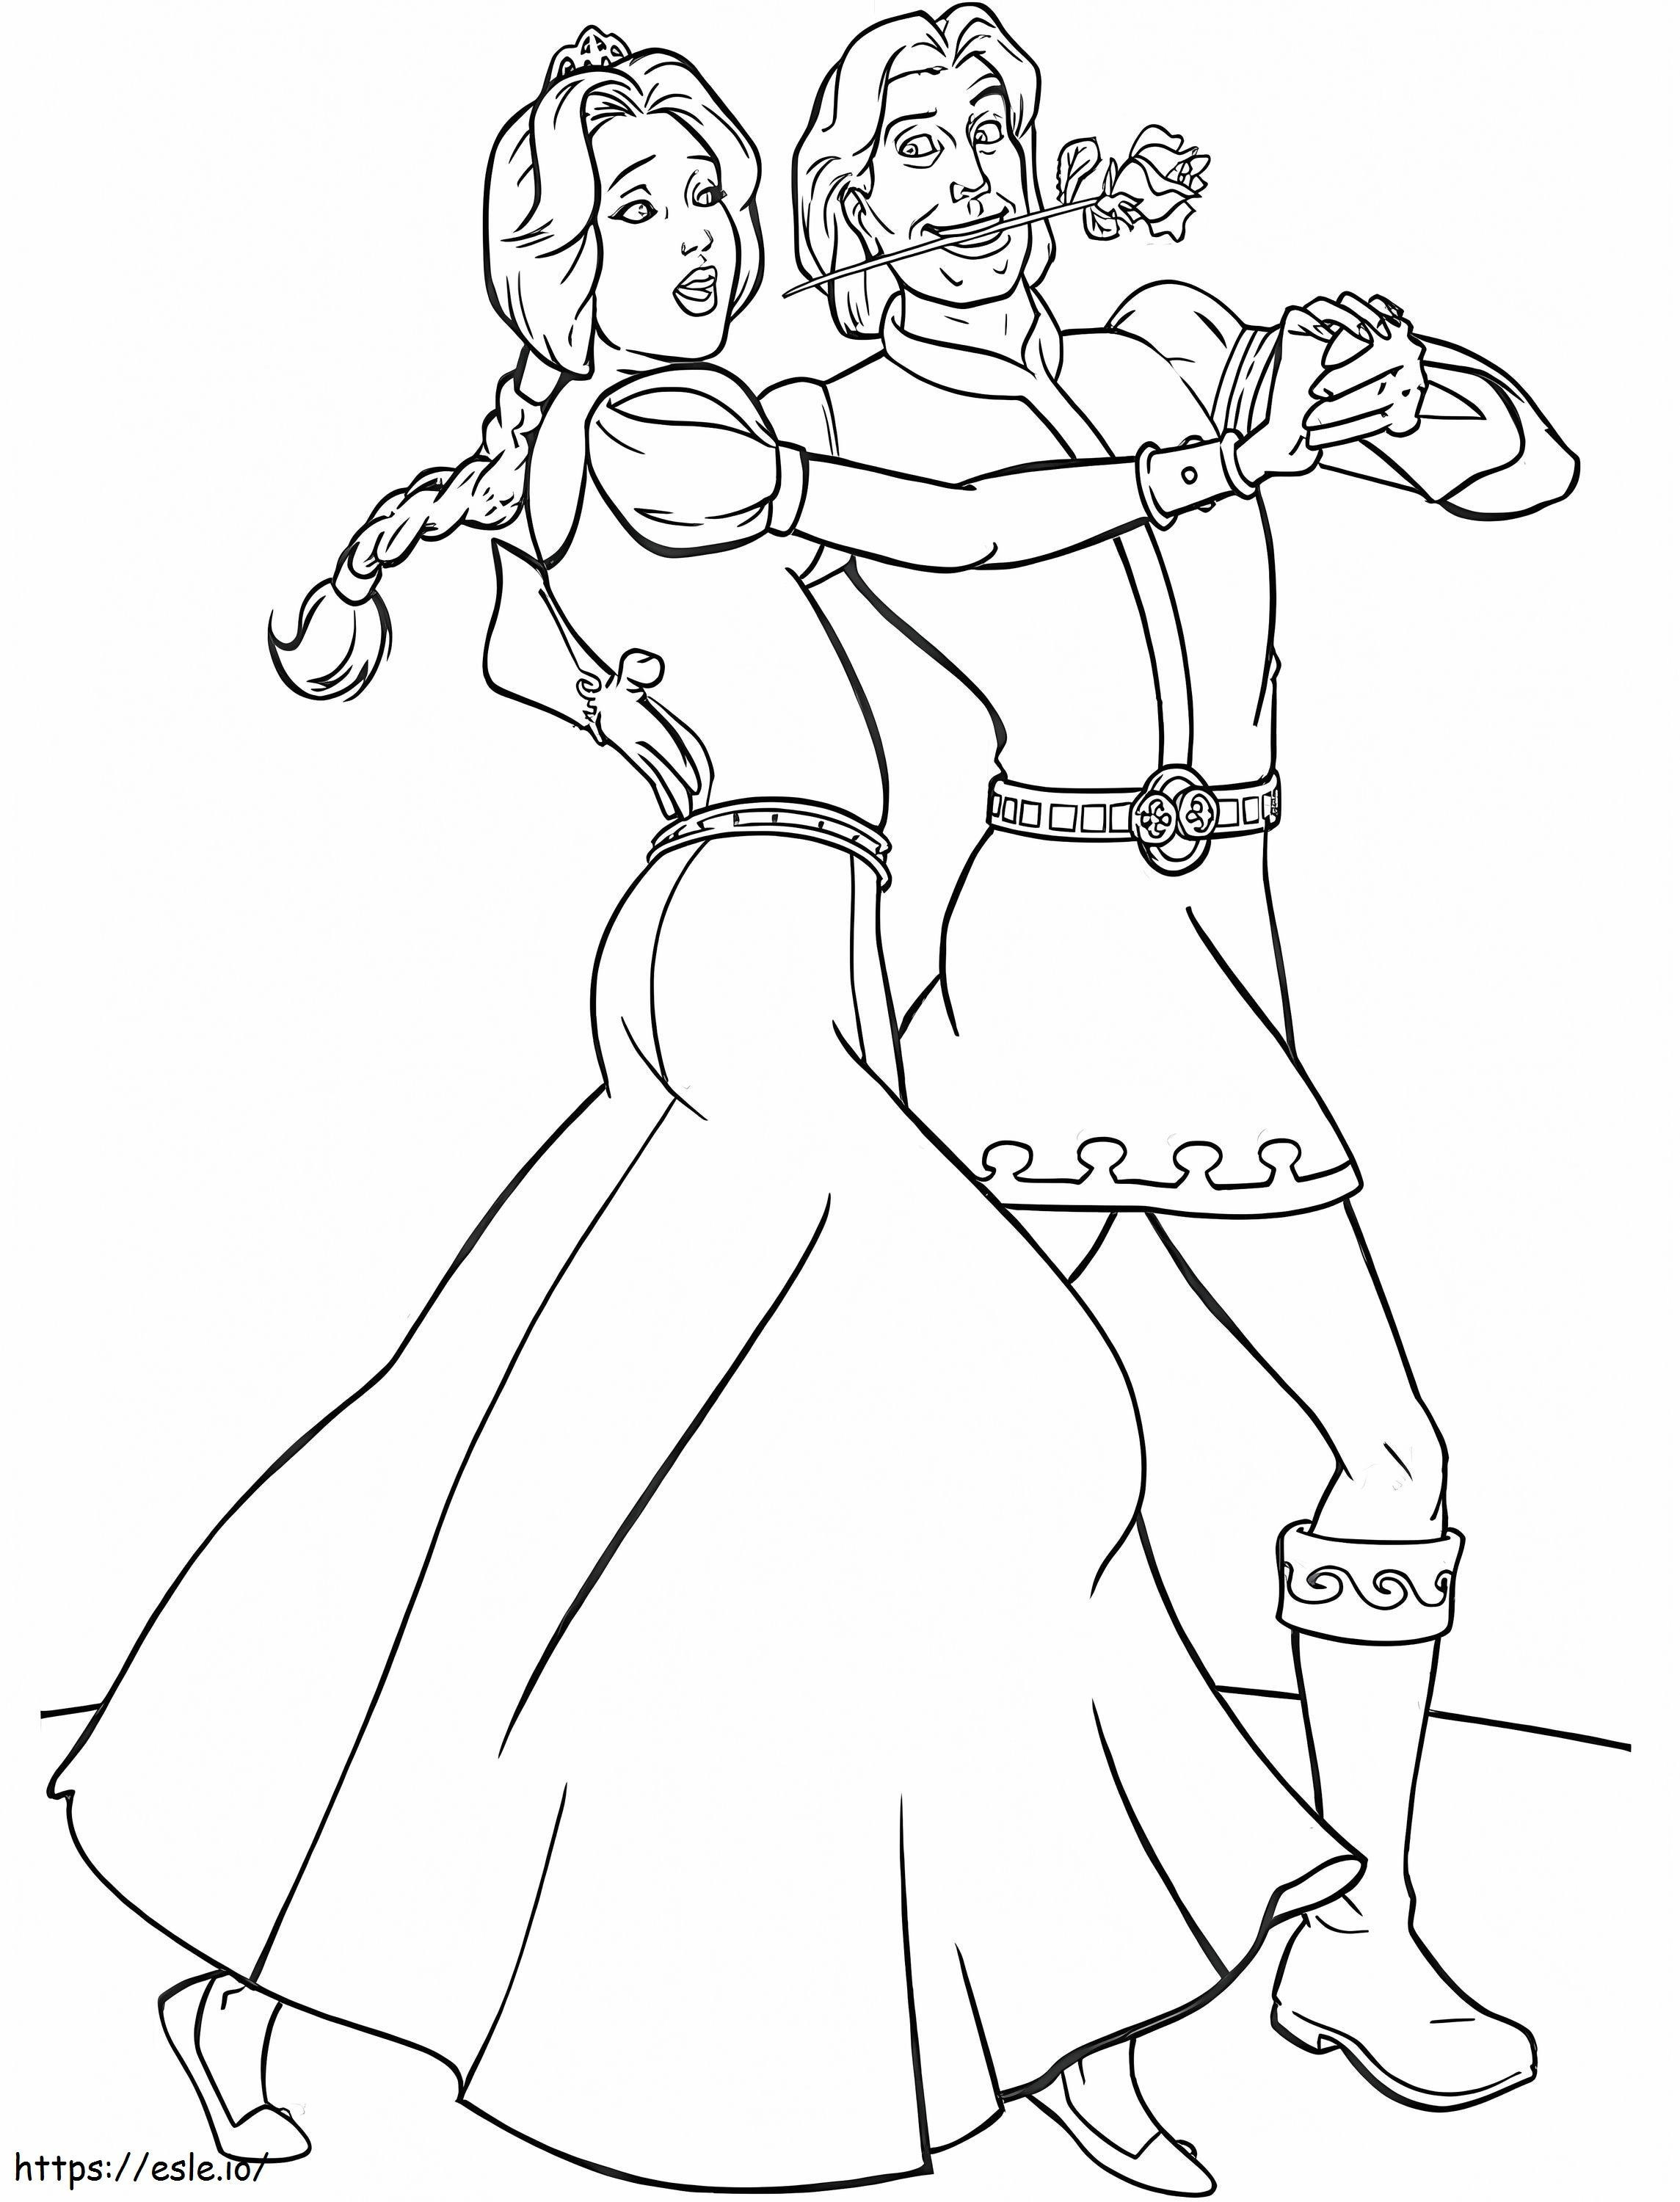 Fiona And Prince Charming Dancing A4 coloring page